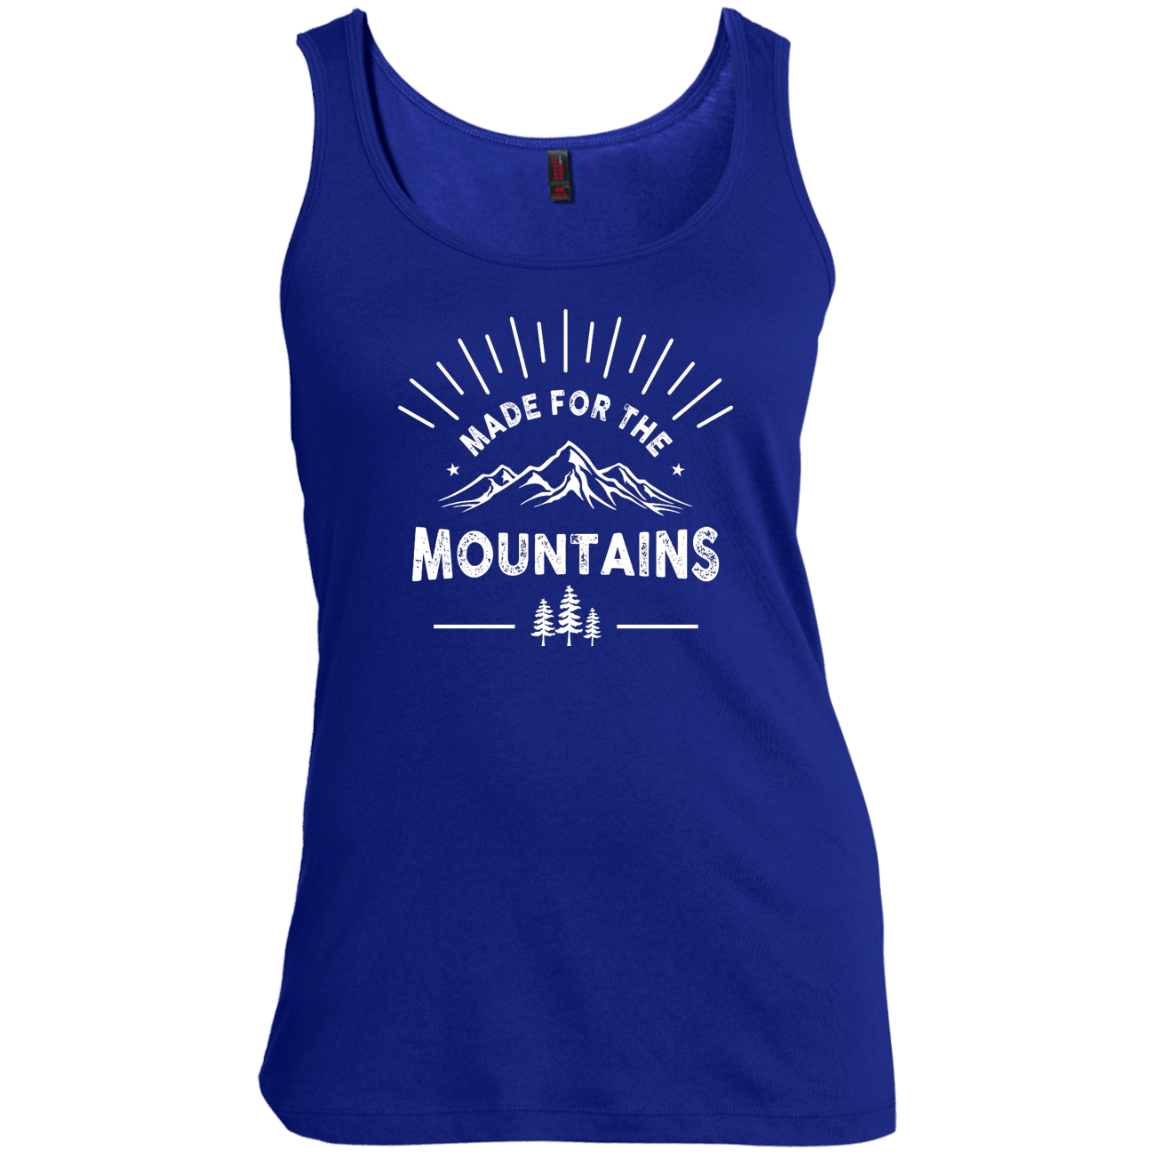 Made For The Mountains Tank Tops - Powderaddicts